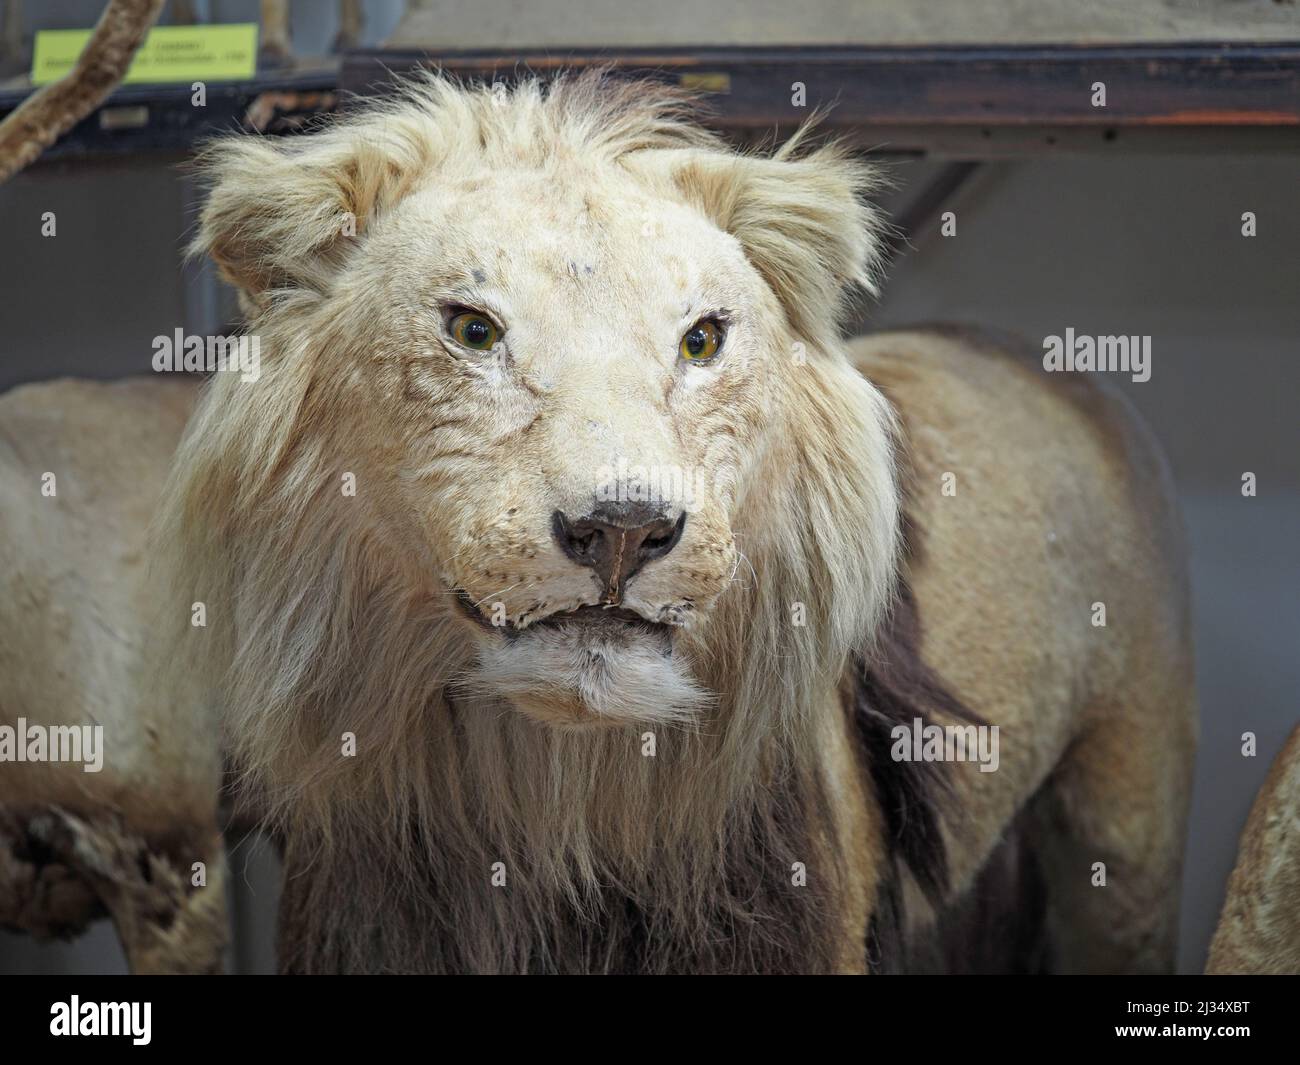 Lion, carnivorous mammals of felines. Exposition of the Zoological Museum. Big cats of the wild. Stock Photo